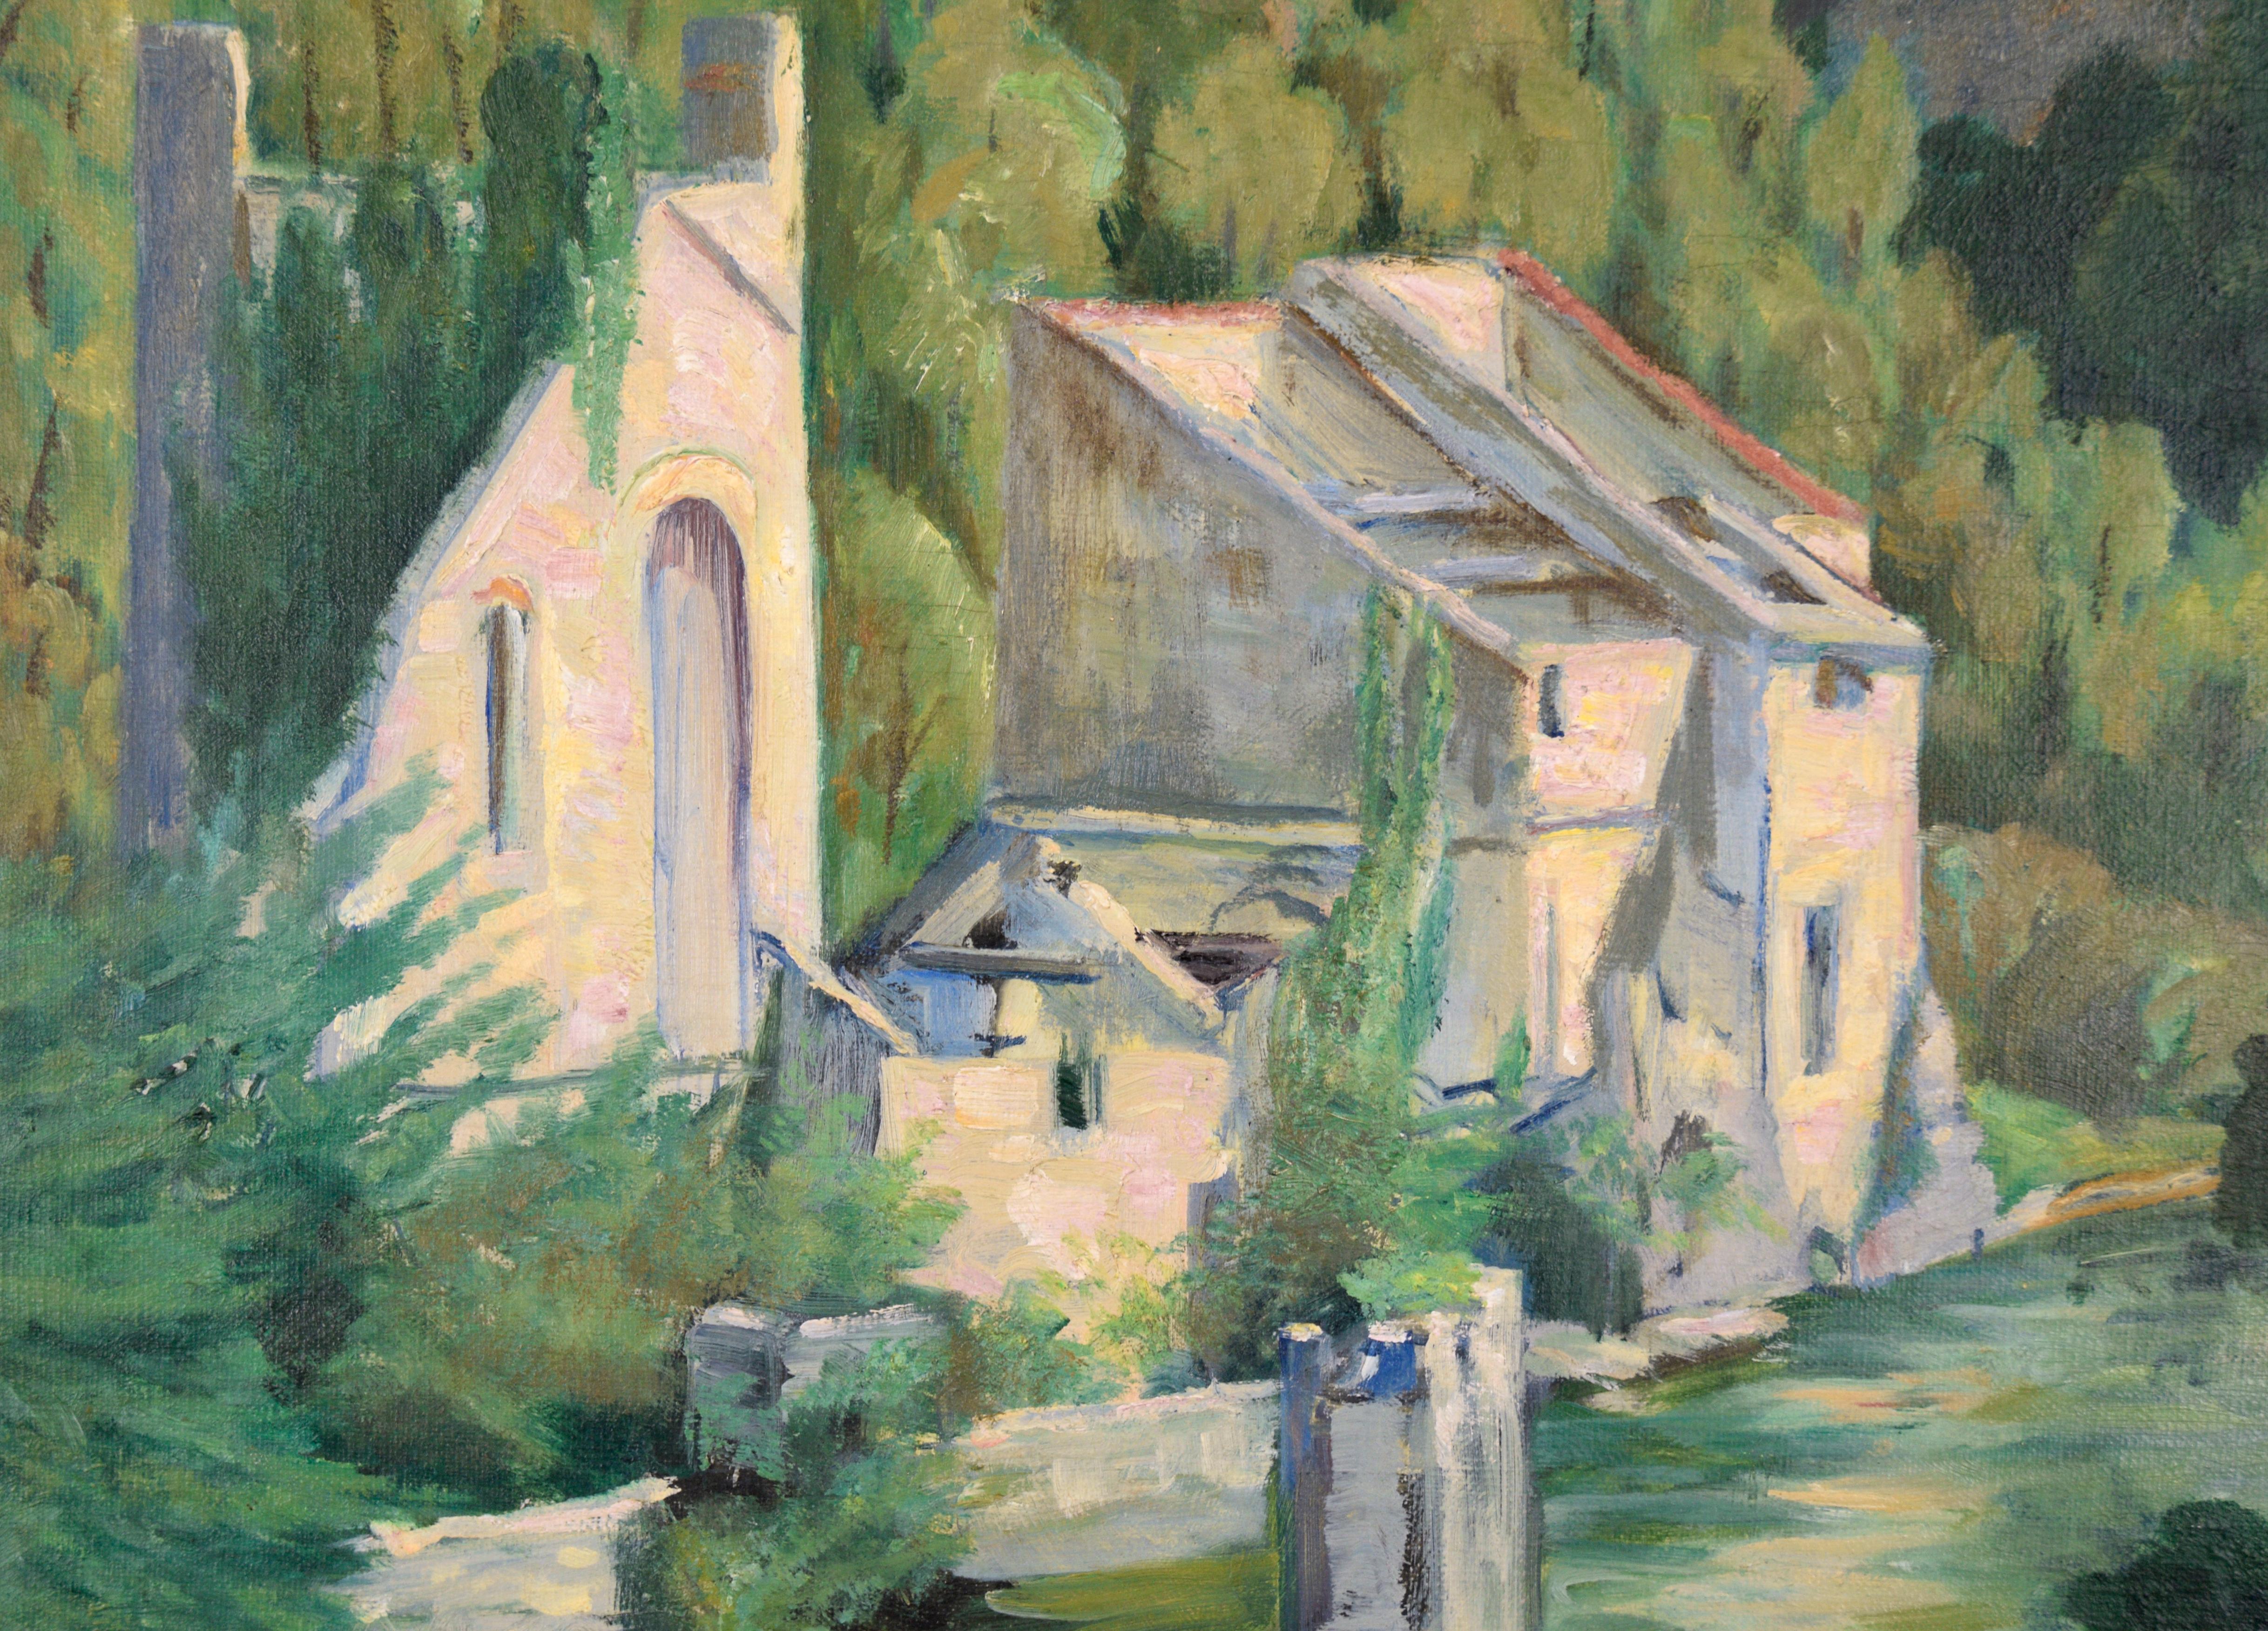 Monastery Ruins by the River - Landscape - Impressionist Painting by H. W. Jacobsen